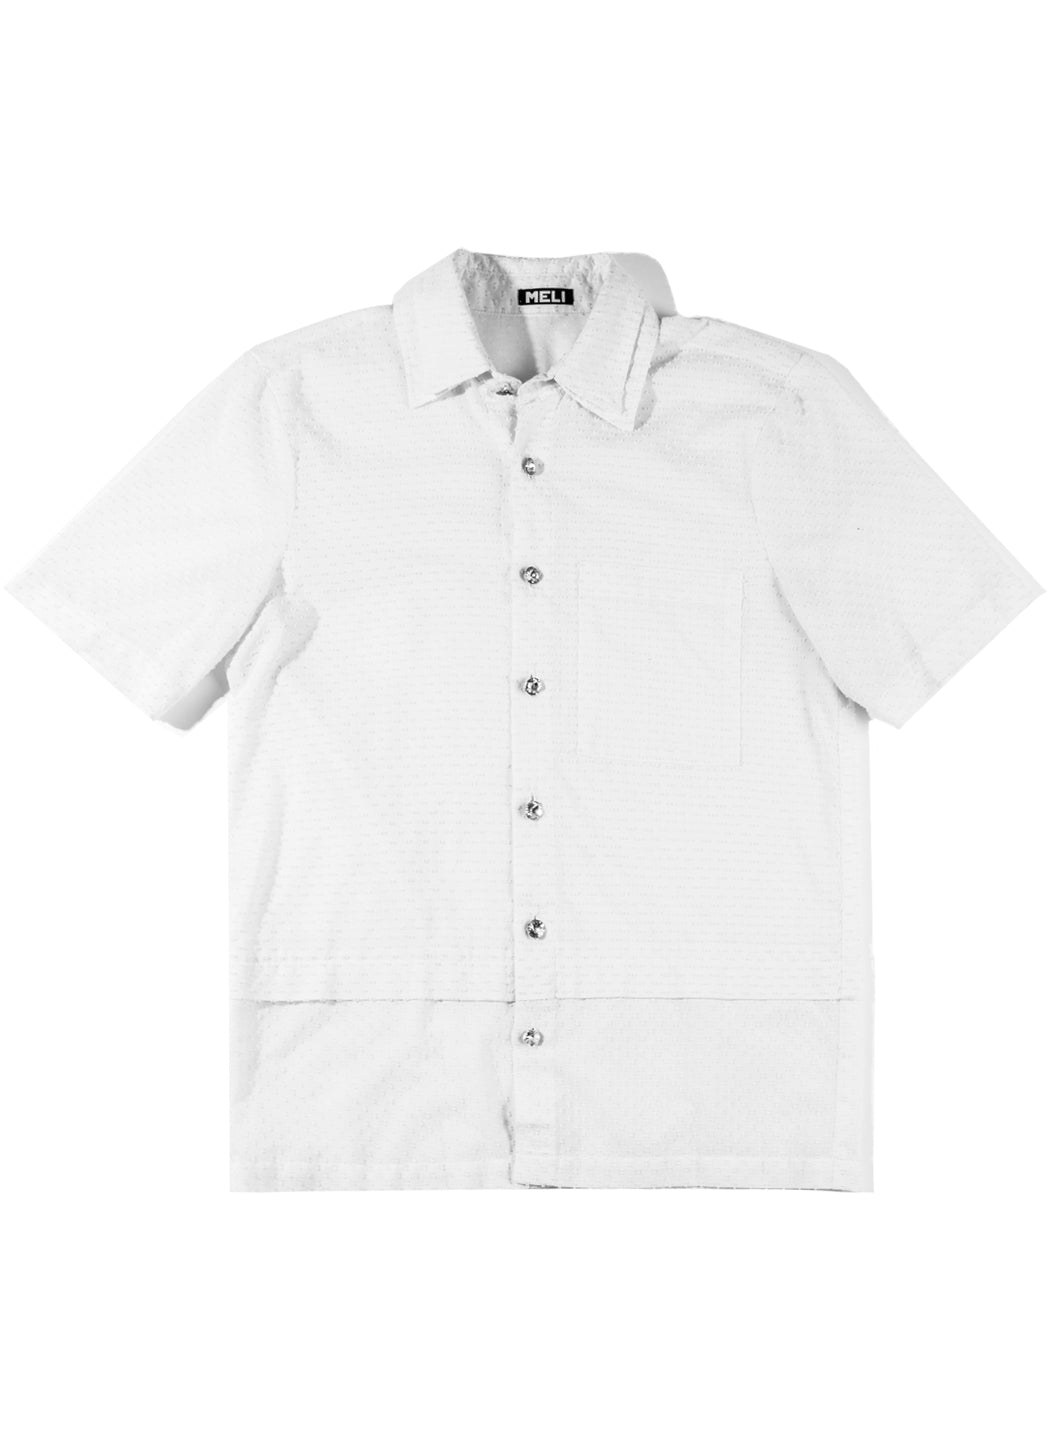 DOUBLE-COLLAR BUTTON-UP